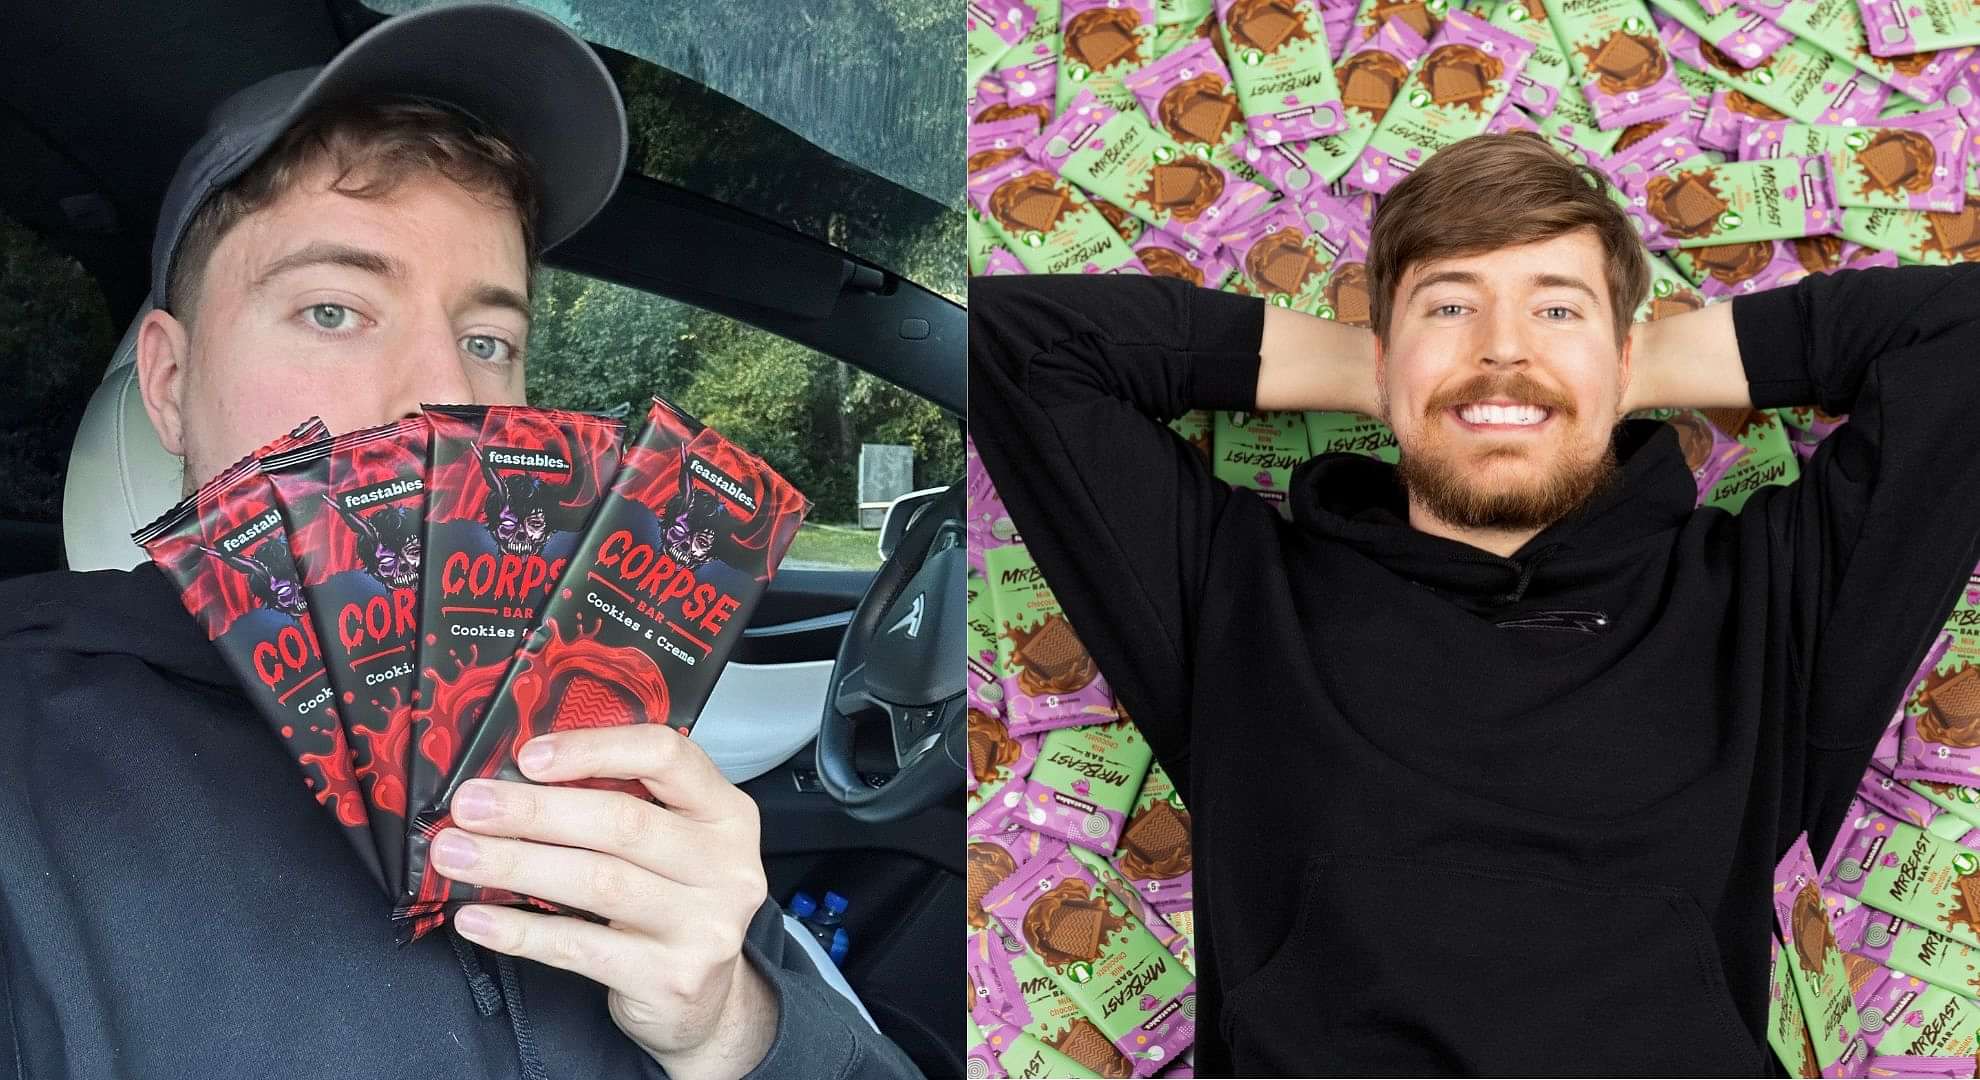 MrBeast Feastables revenue is an investment for MrBeast's videos